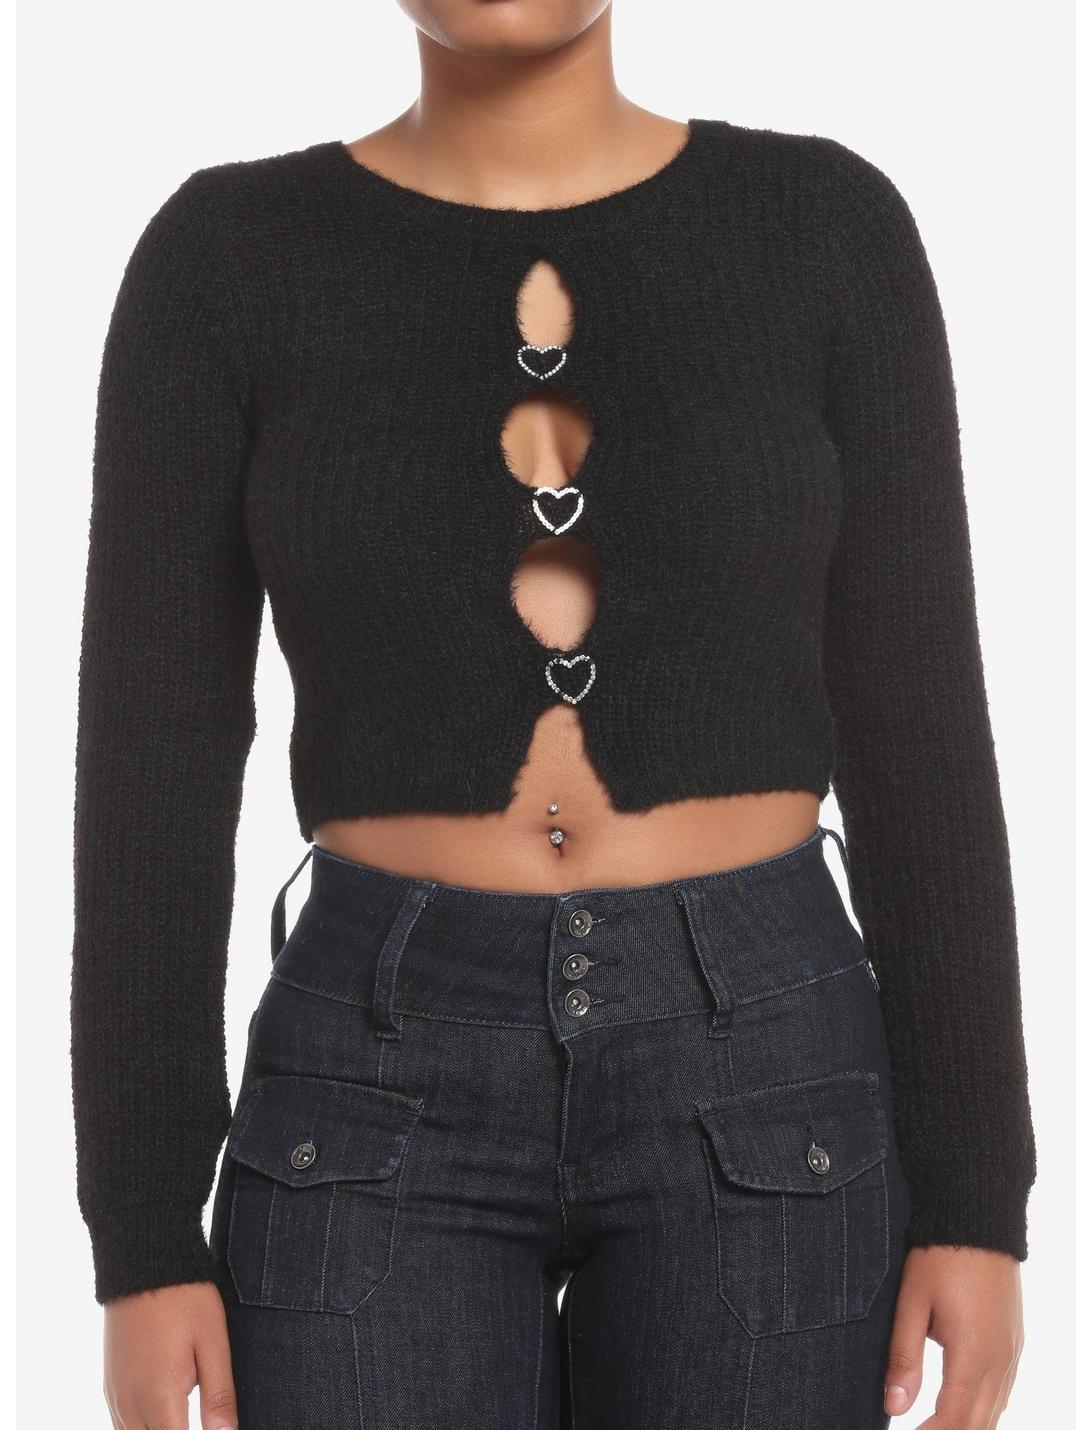 Black Fuzzy Heart Bling Cut-Out Girls Crop Sweater, IVORY, hi-res